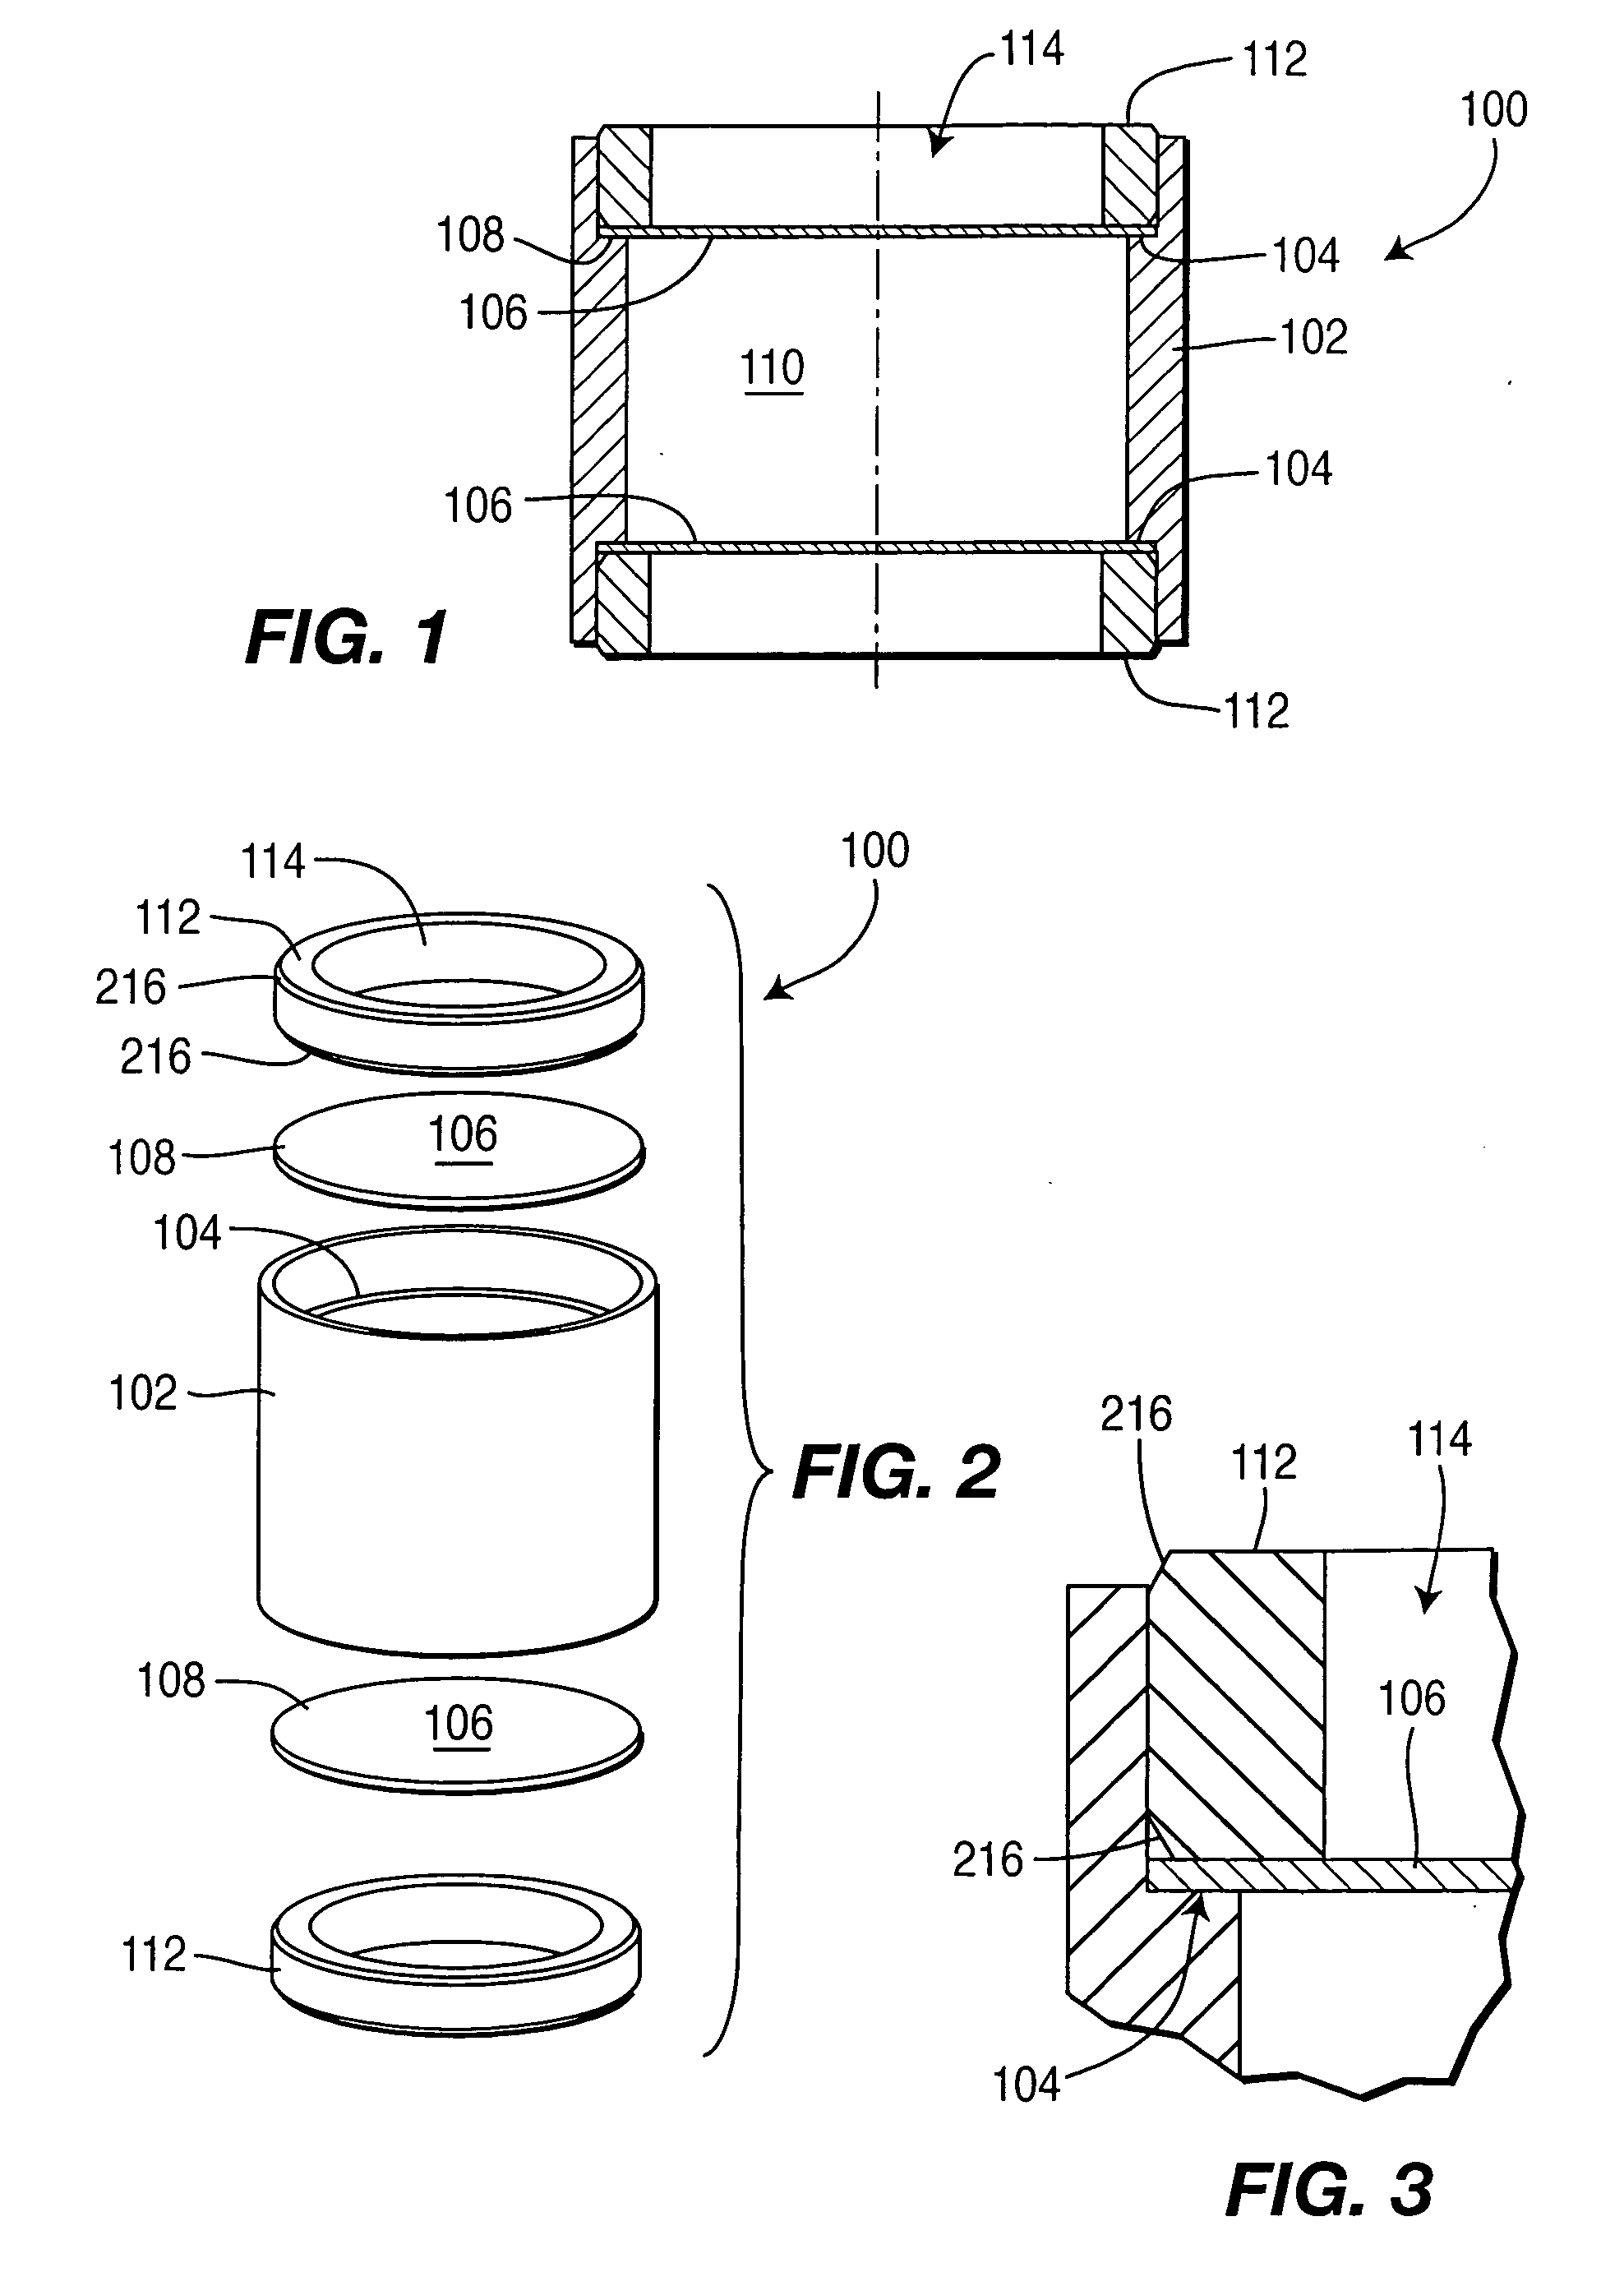 Controlled-release drug delivery system